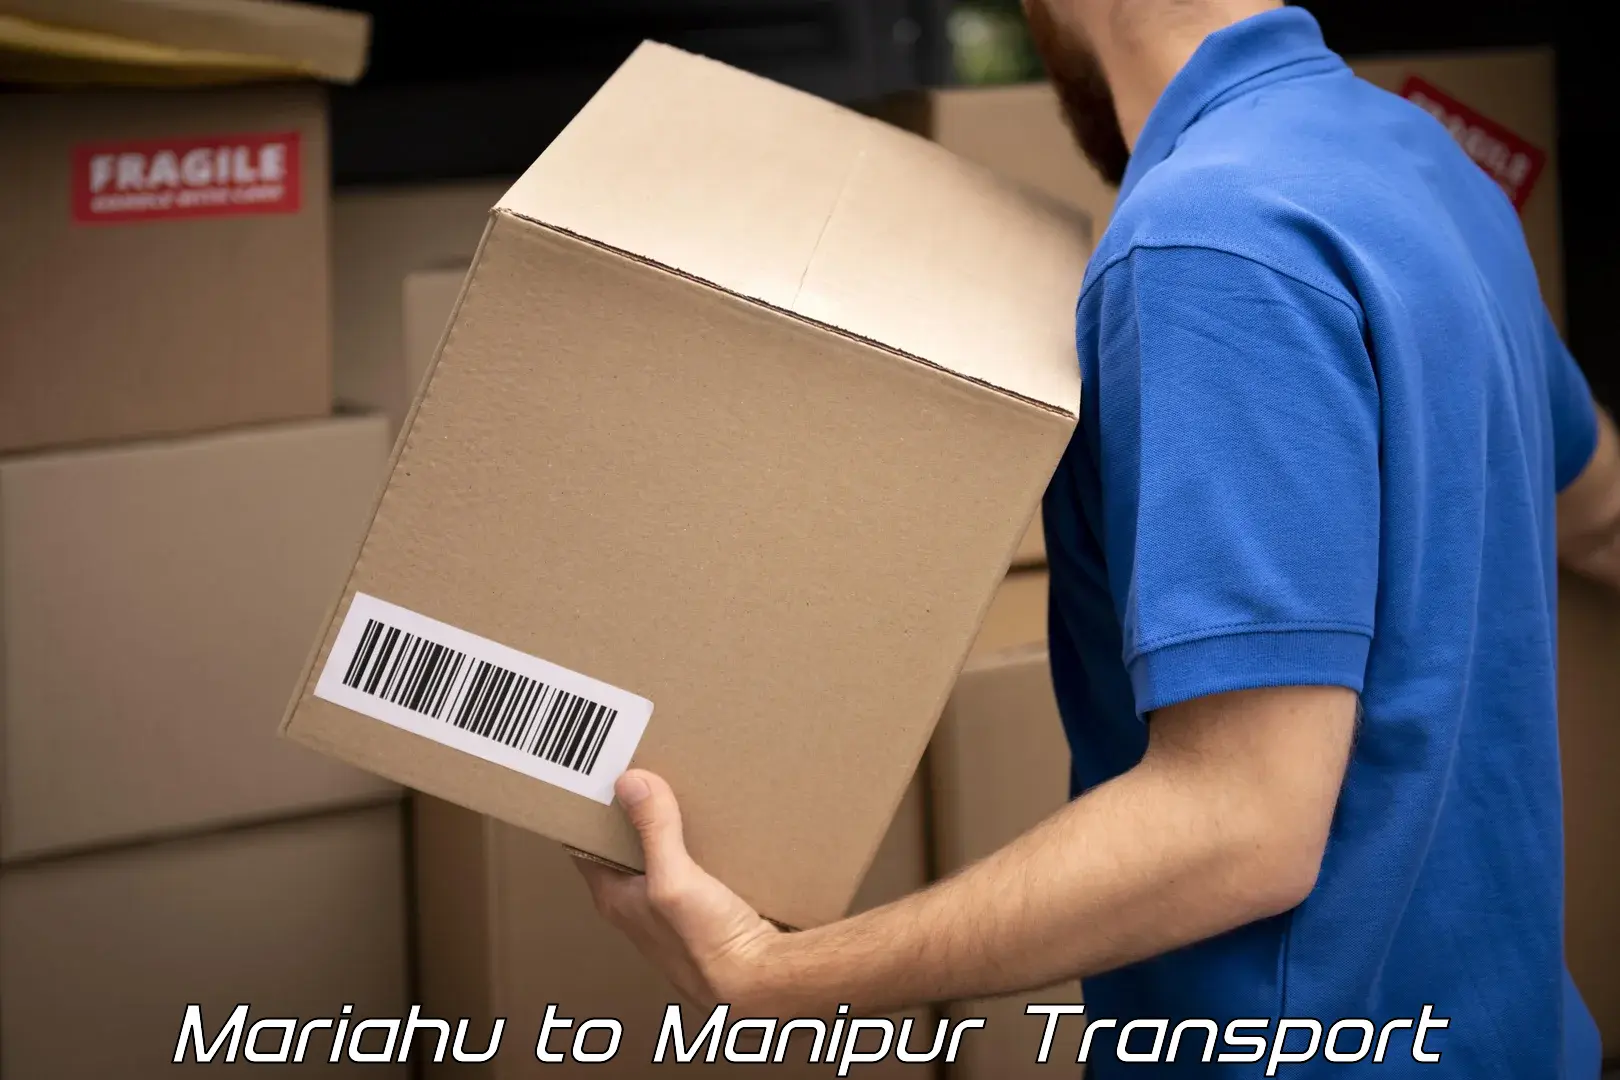 Pick up transport service Mariahu to Imphal